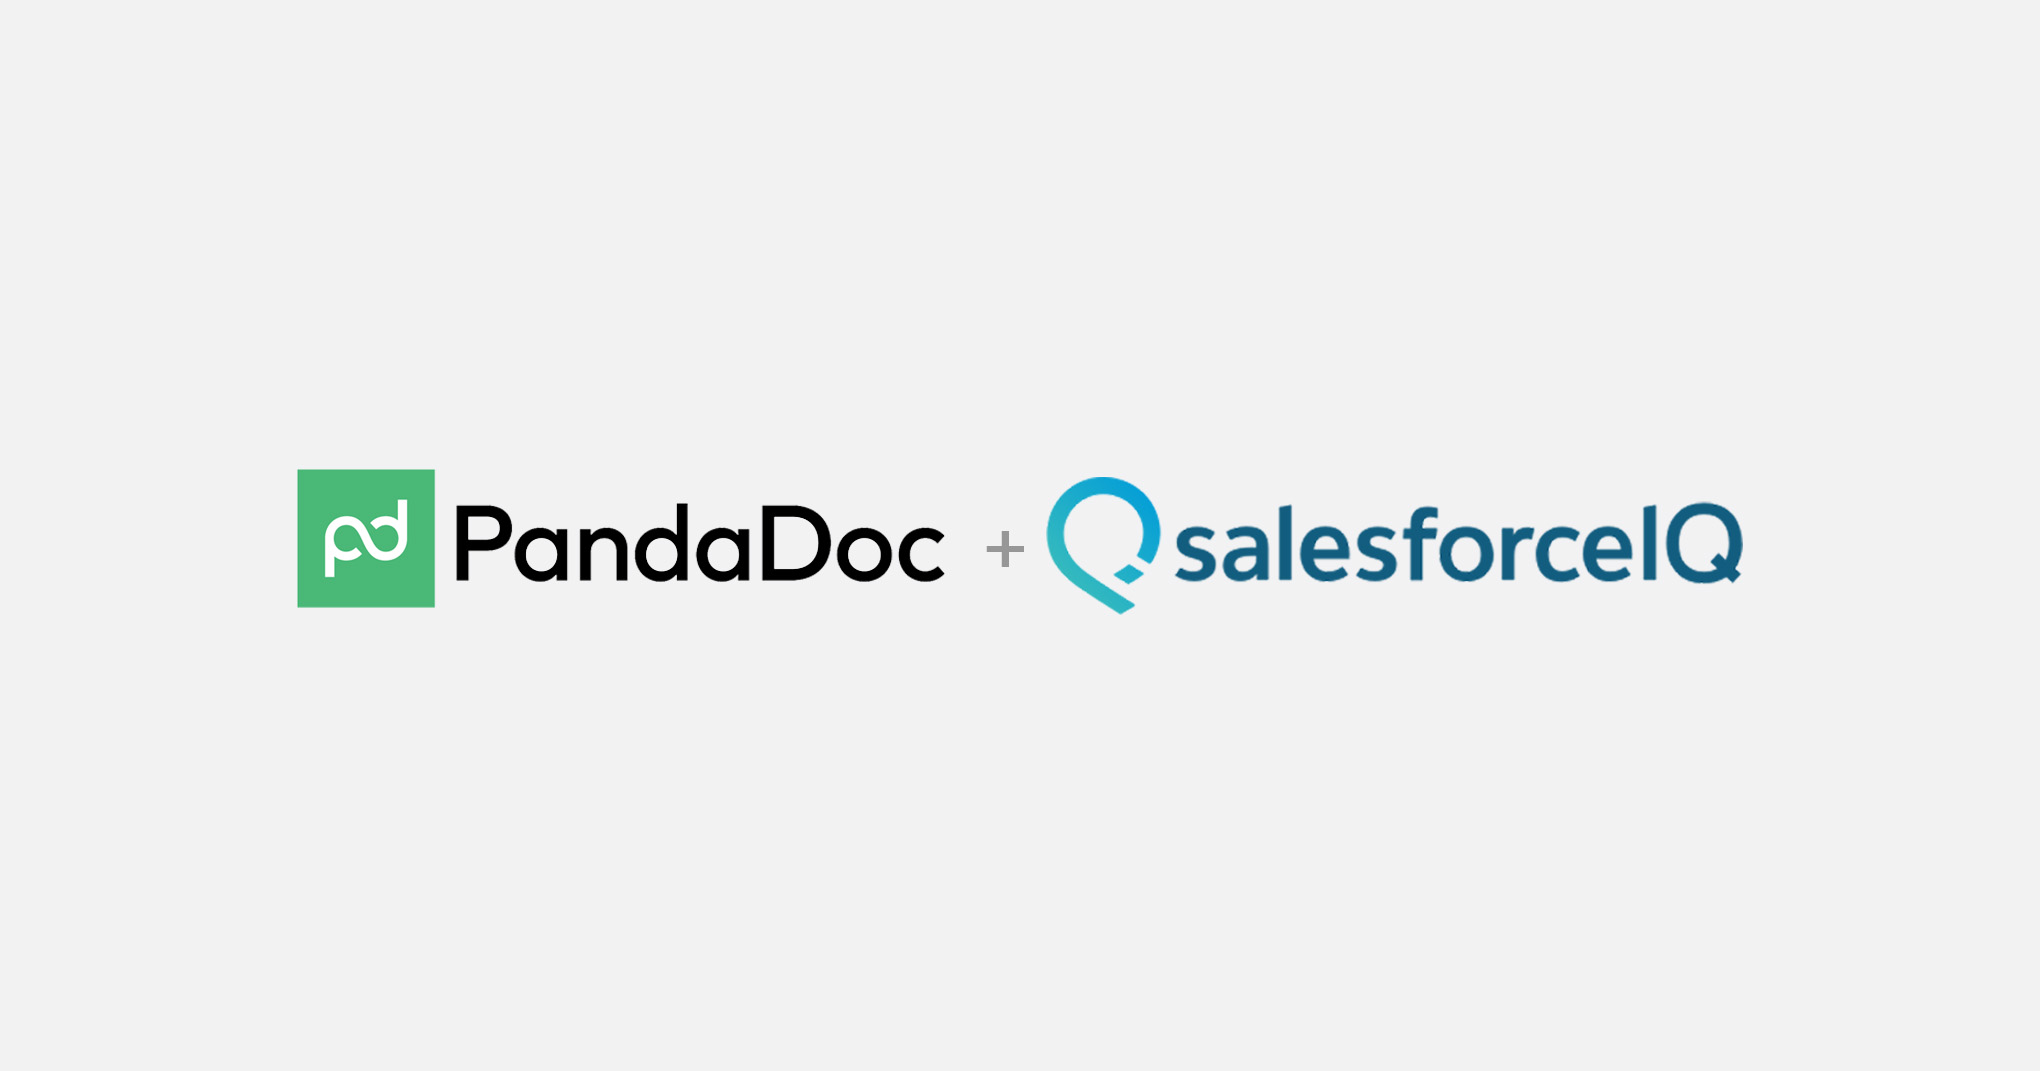 Taking relationship intelligence even further with PandaDoc and SalesforceIQ CRM